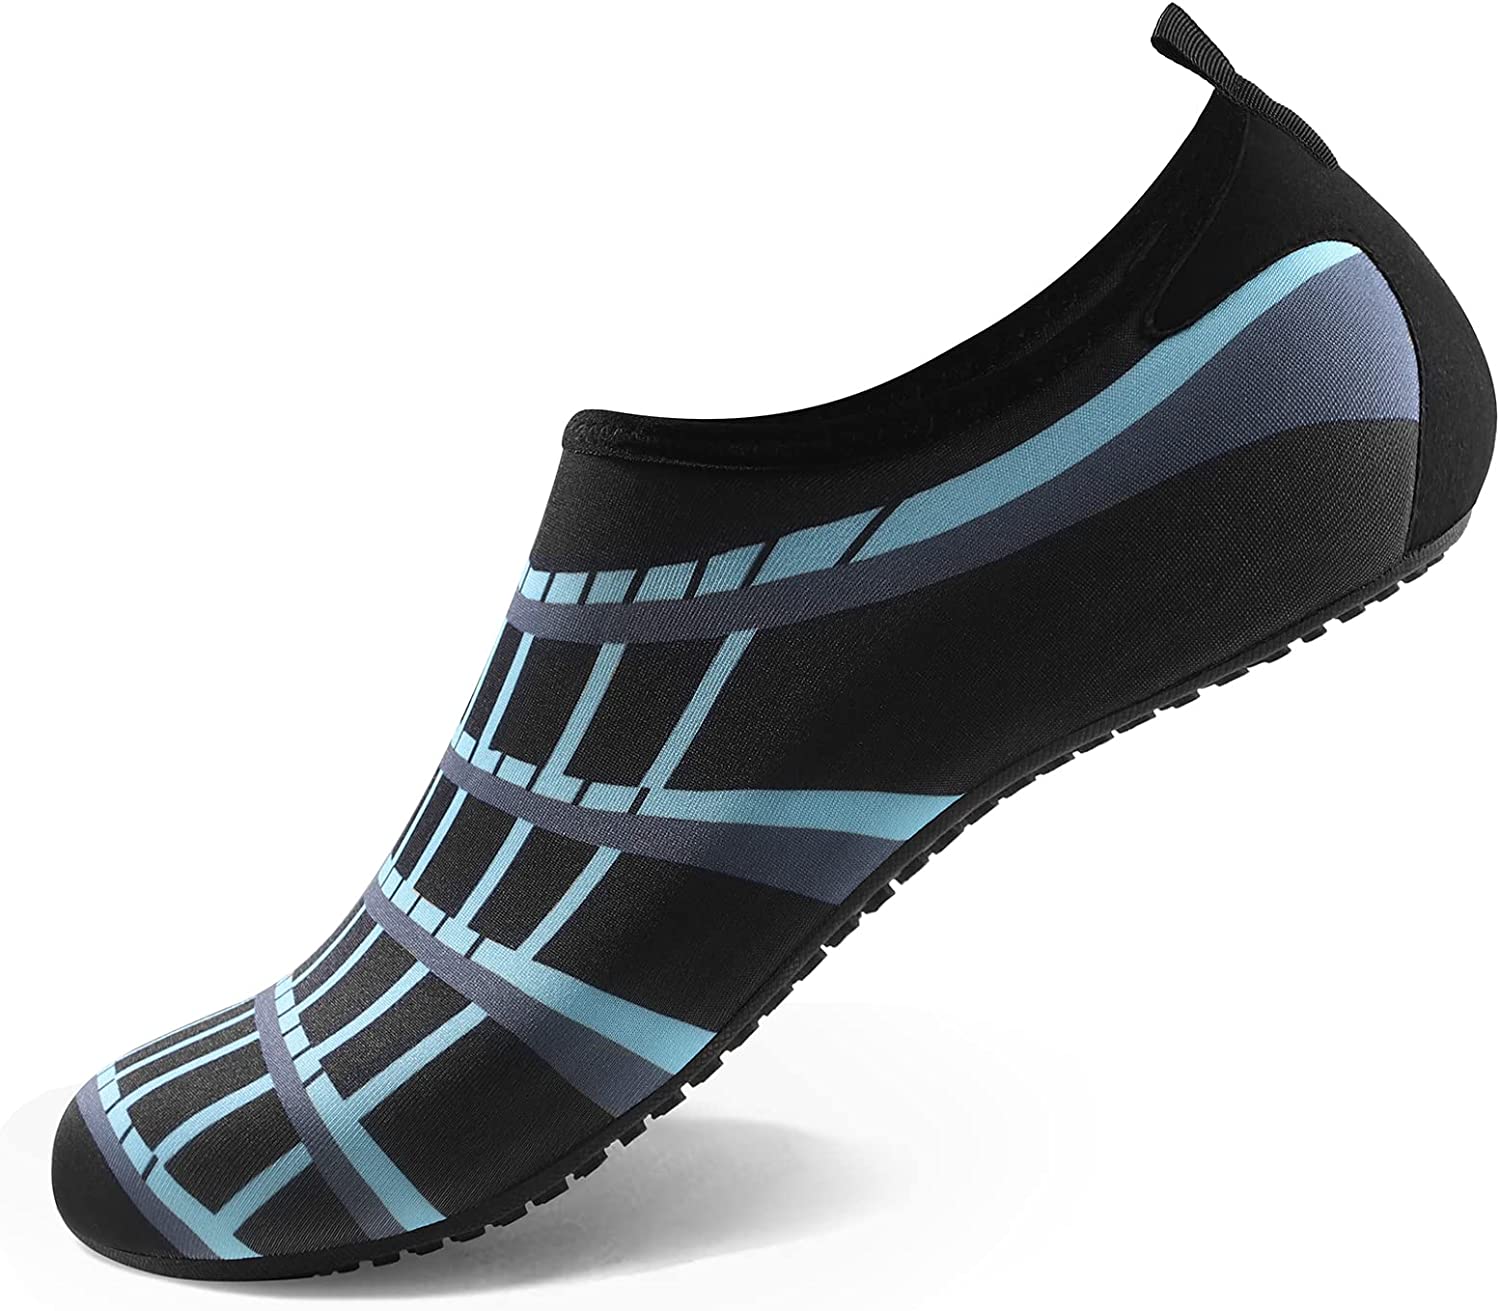 ATHMILE Water Shoes Women Men Barefoot Aqua Socks Quick-Dry for